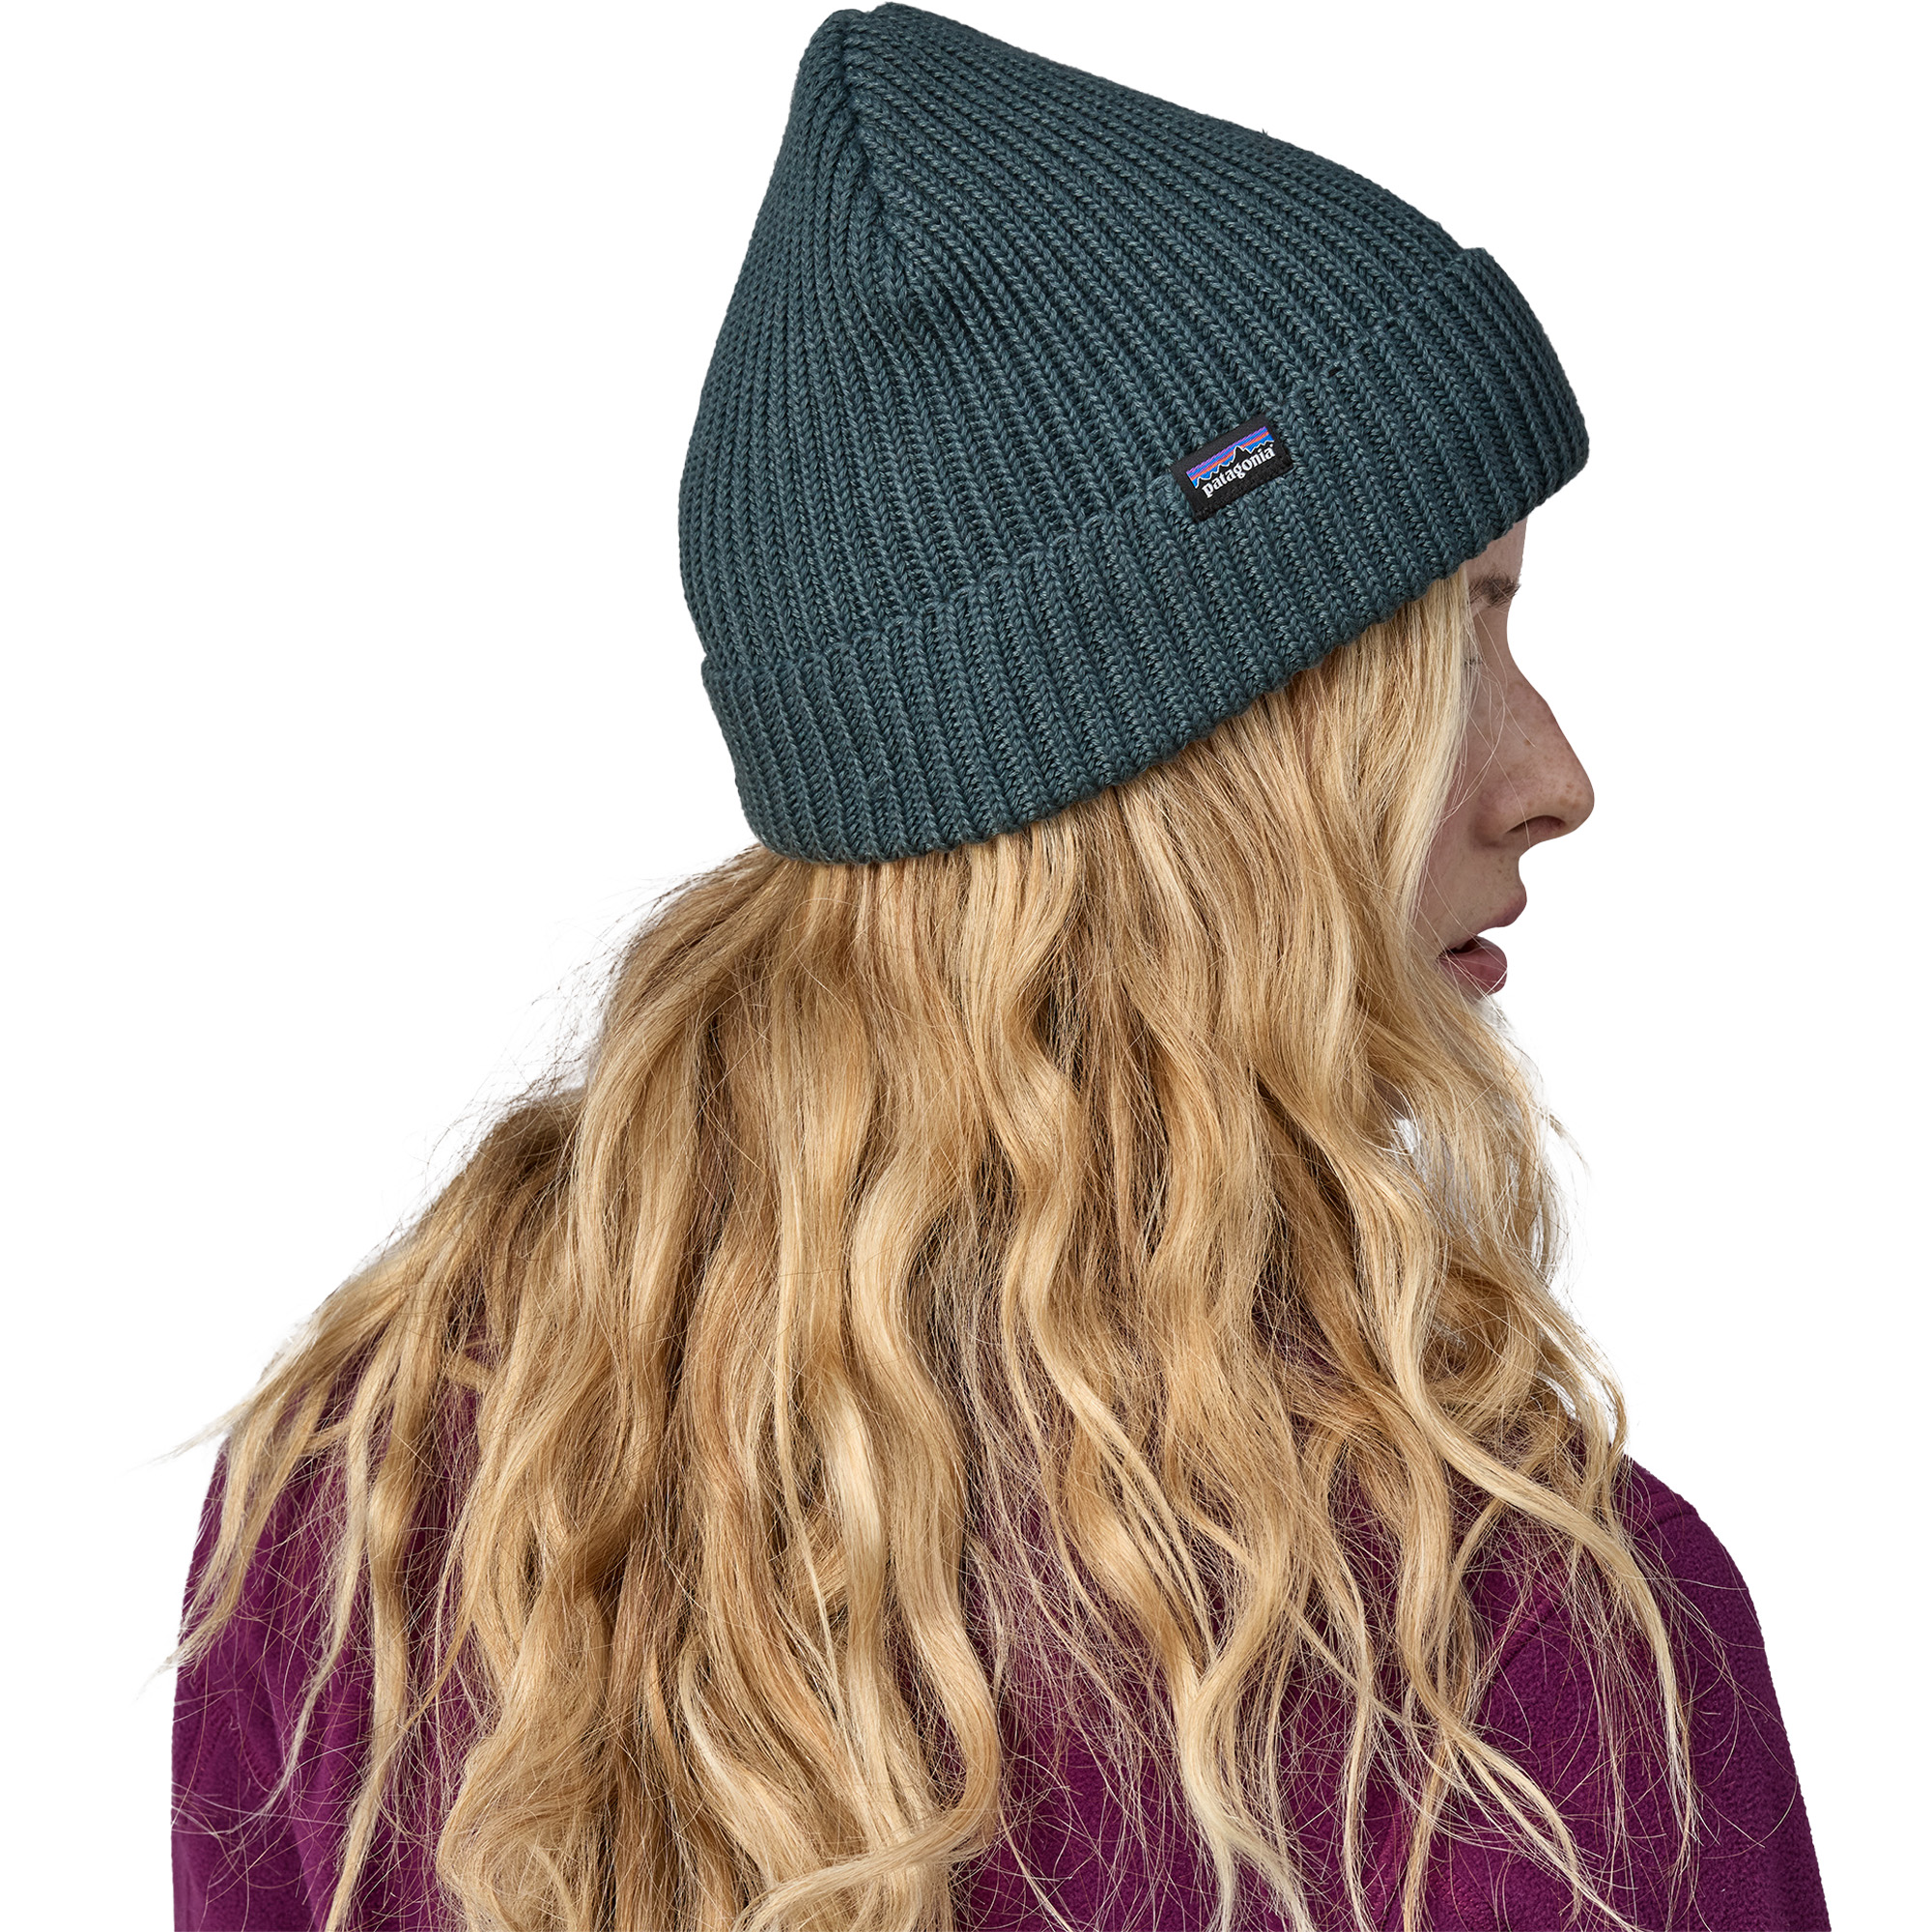 Patagonia Fisherman's Rolled Cuffed Beanie Hat